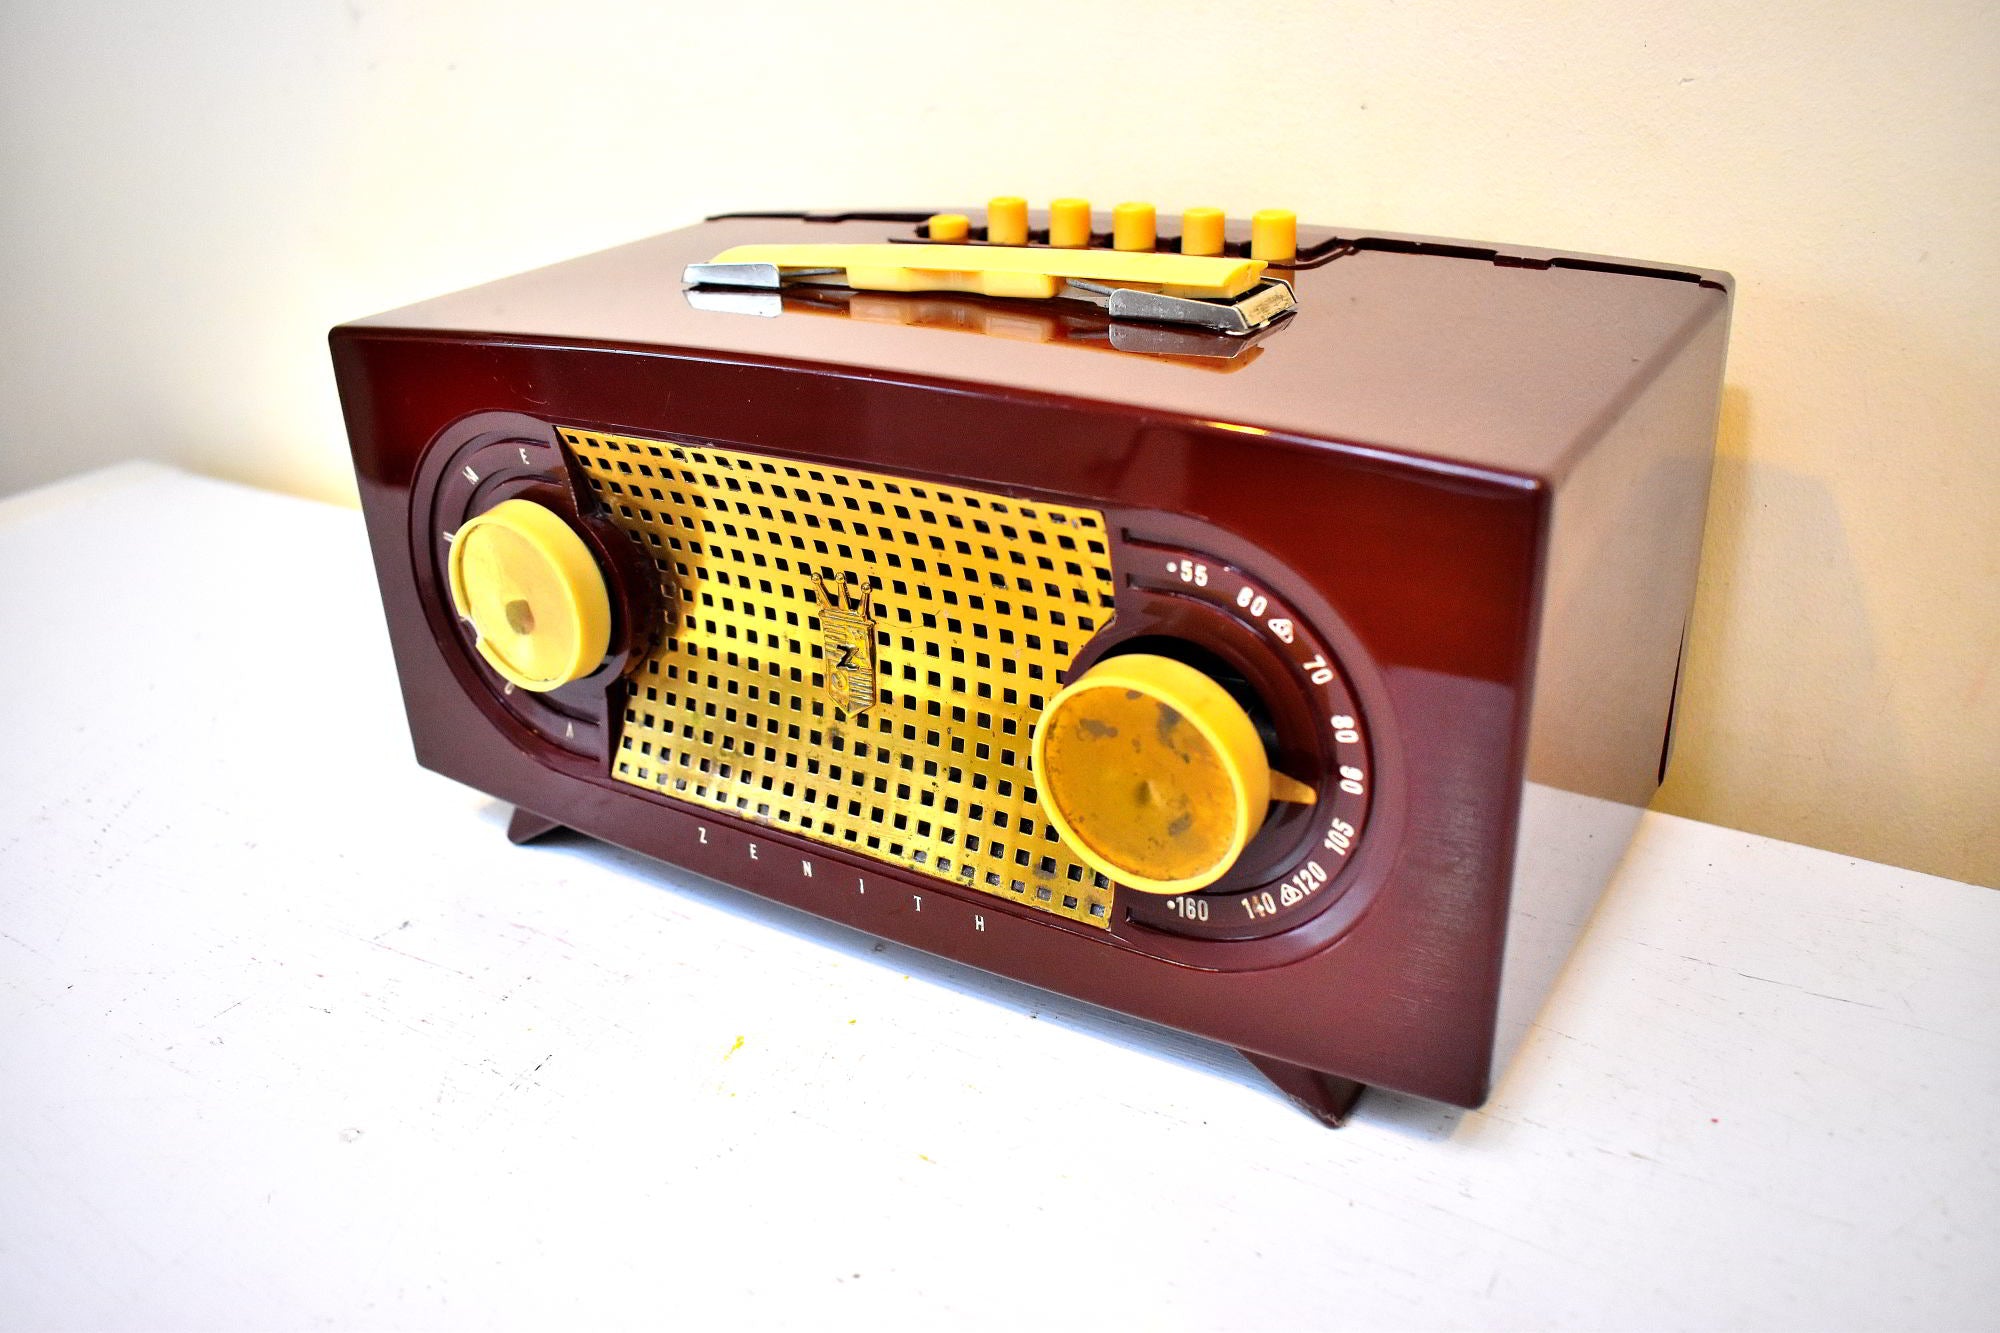 Burgundy Maroon 1954 Zenith Model R512R AM Vacuum Tube Radio Sounds Great! Excellent Condition!